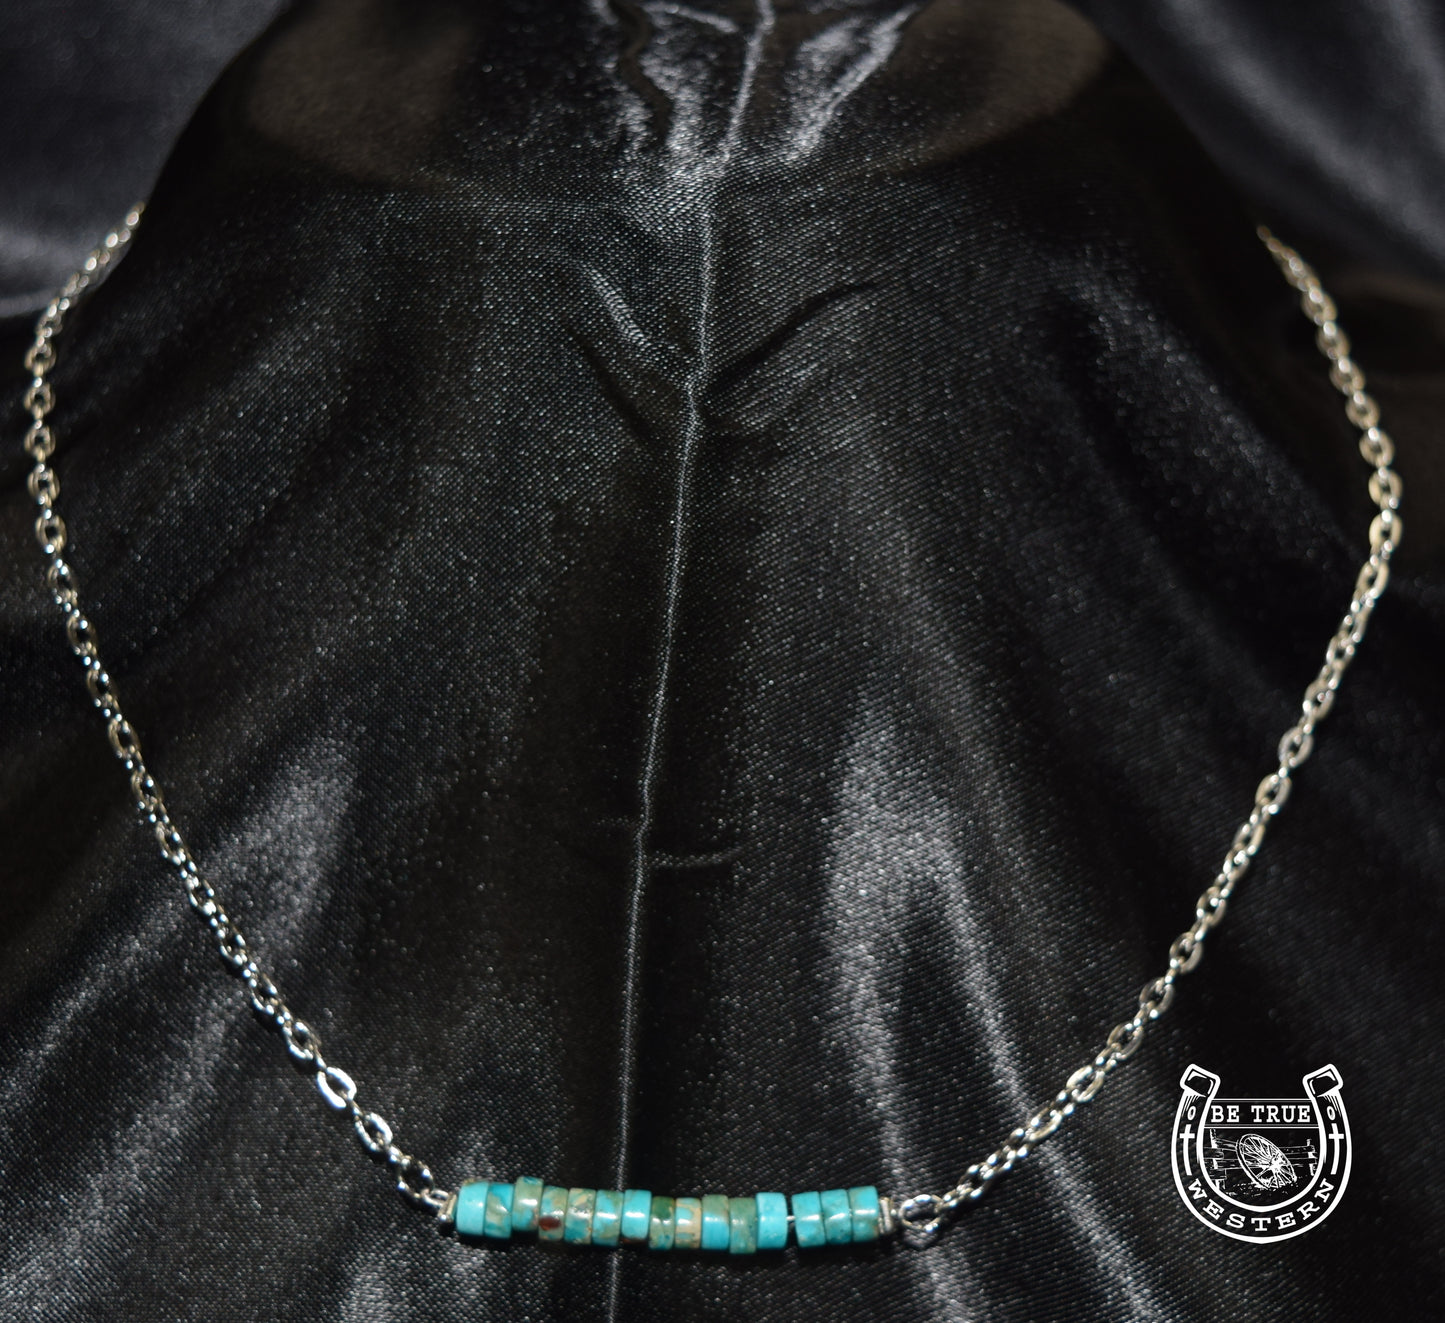 The Small Cable Chain Turquoise Necklace